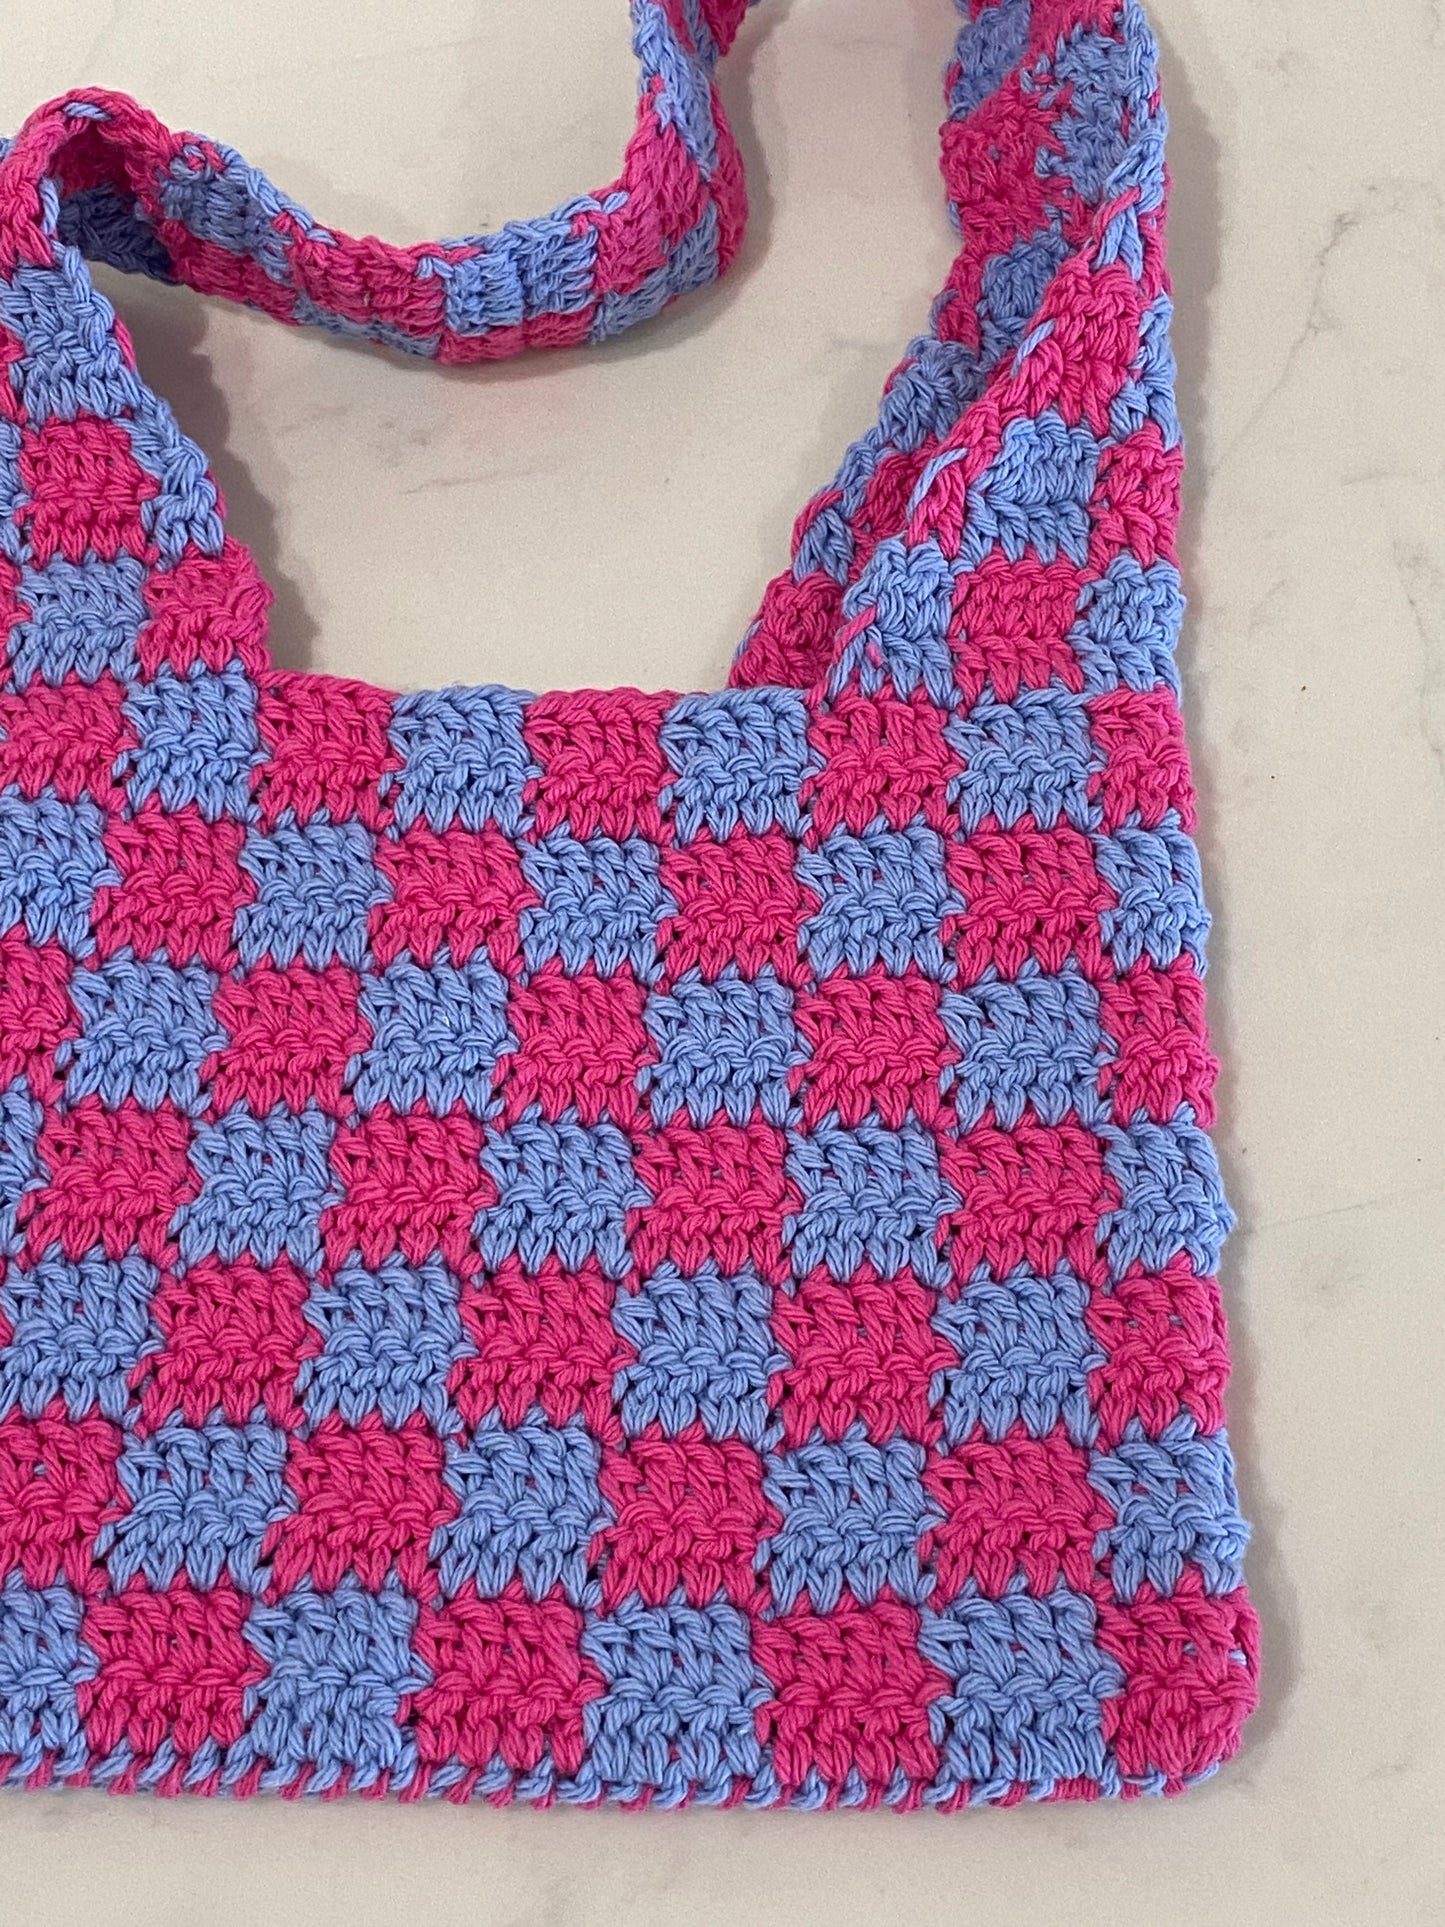 Crochet Shoulder Bag by Clever Stitches - Blue Raspberry